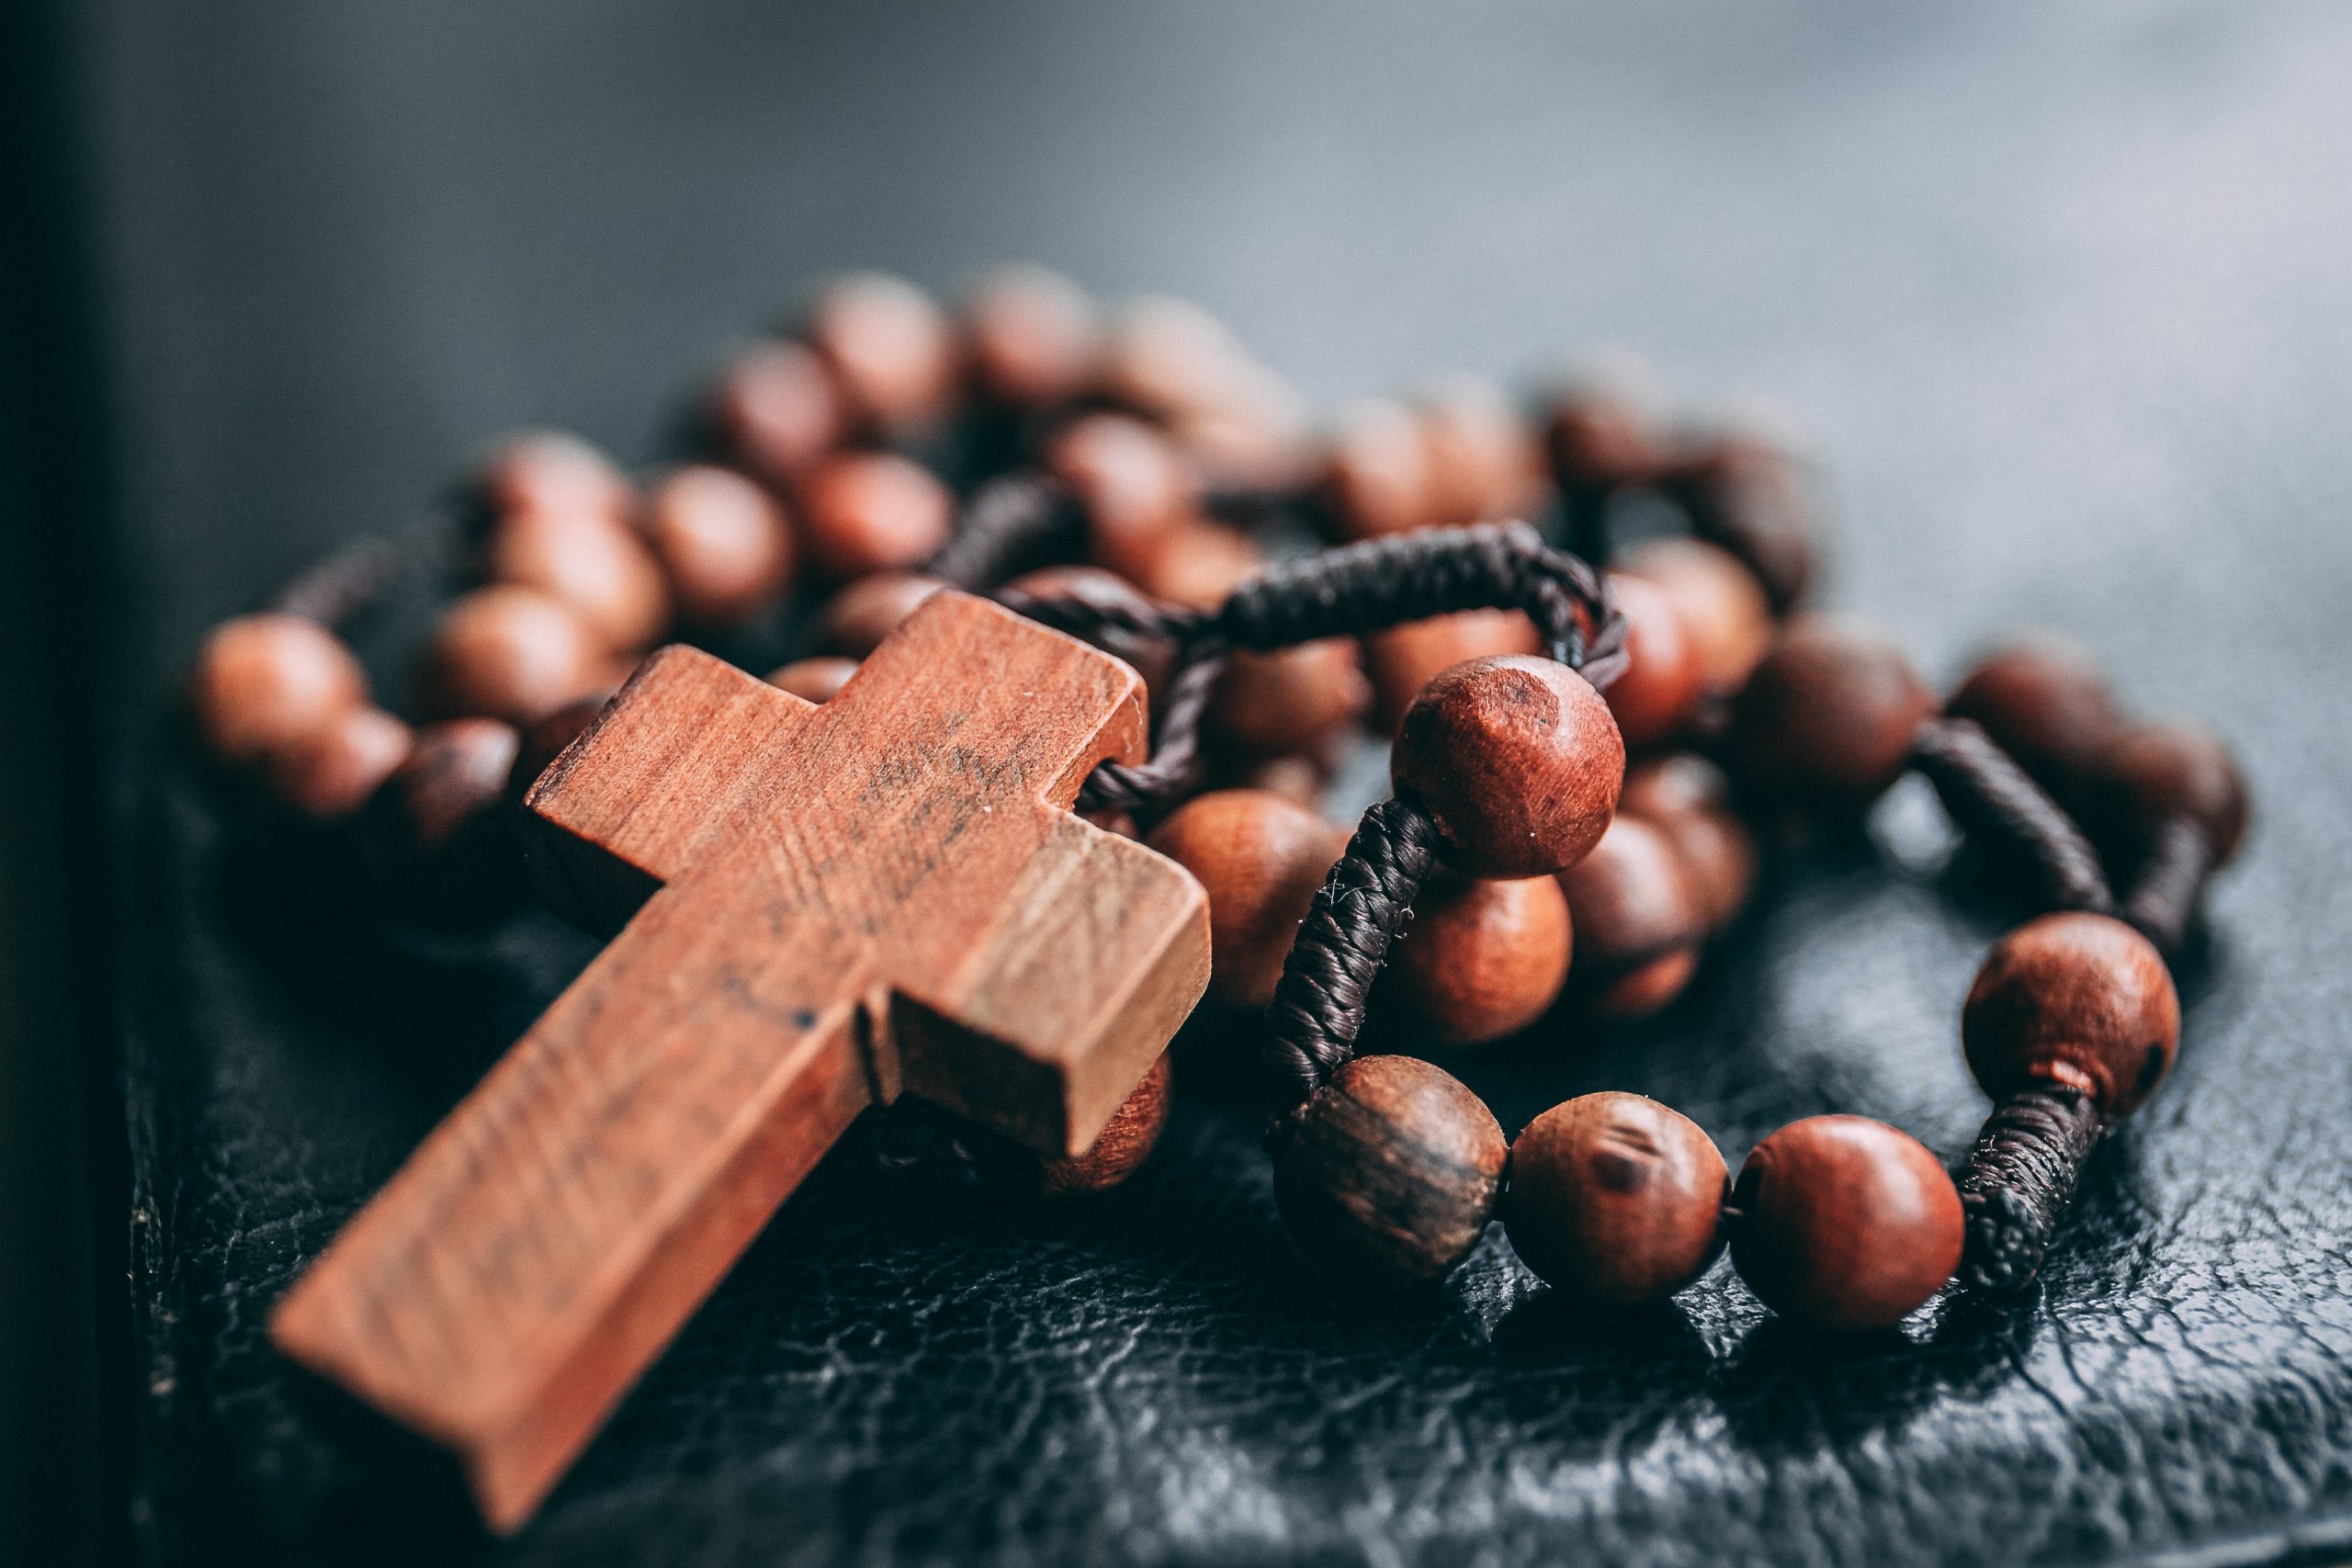 Upclose photo of a rosary